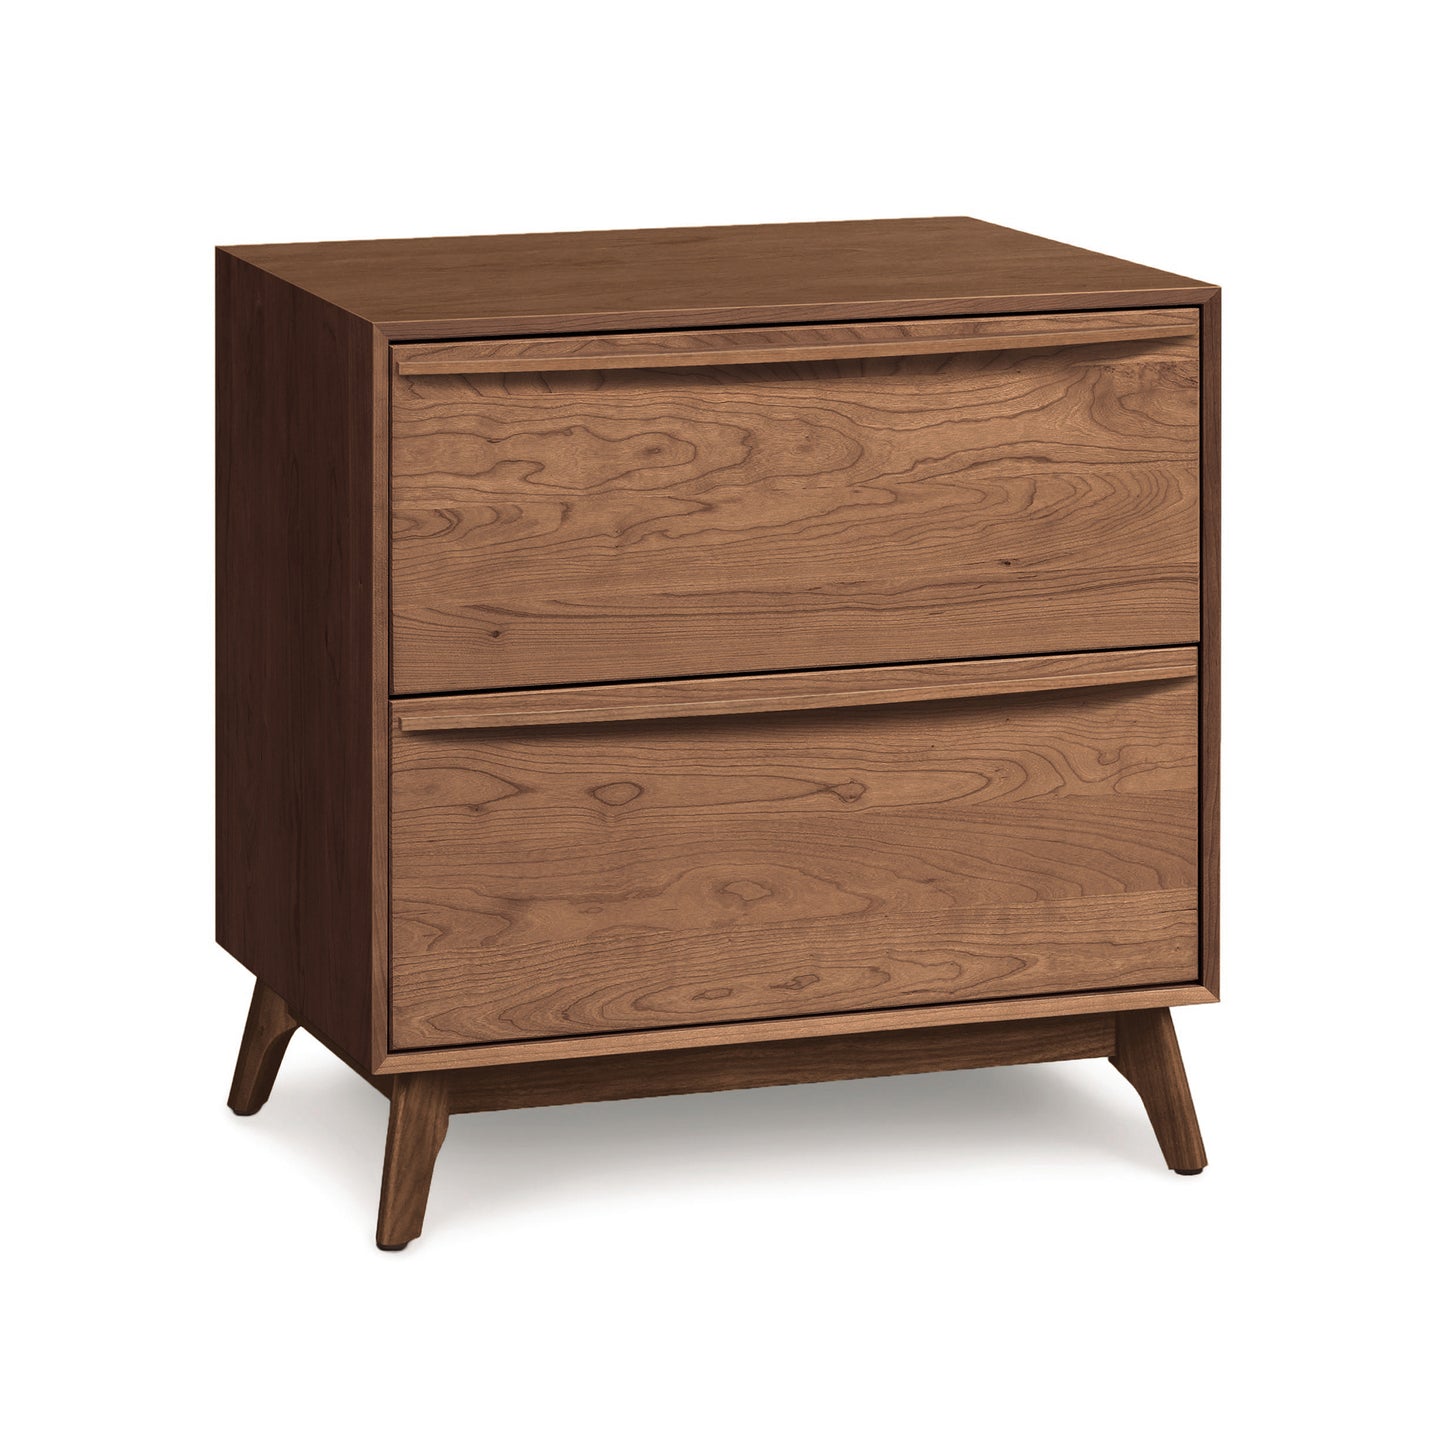 The Catalina 2-Drawer Nightstand by Copeland Furniture, handmade in Bradford, offers a contemporary style and features two drawers.